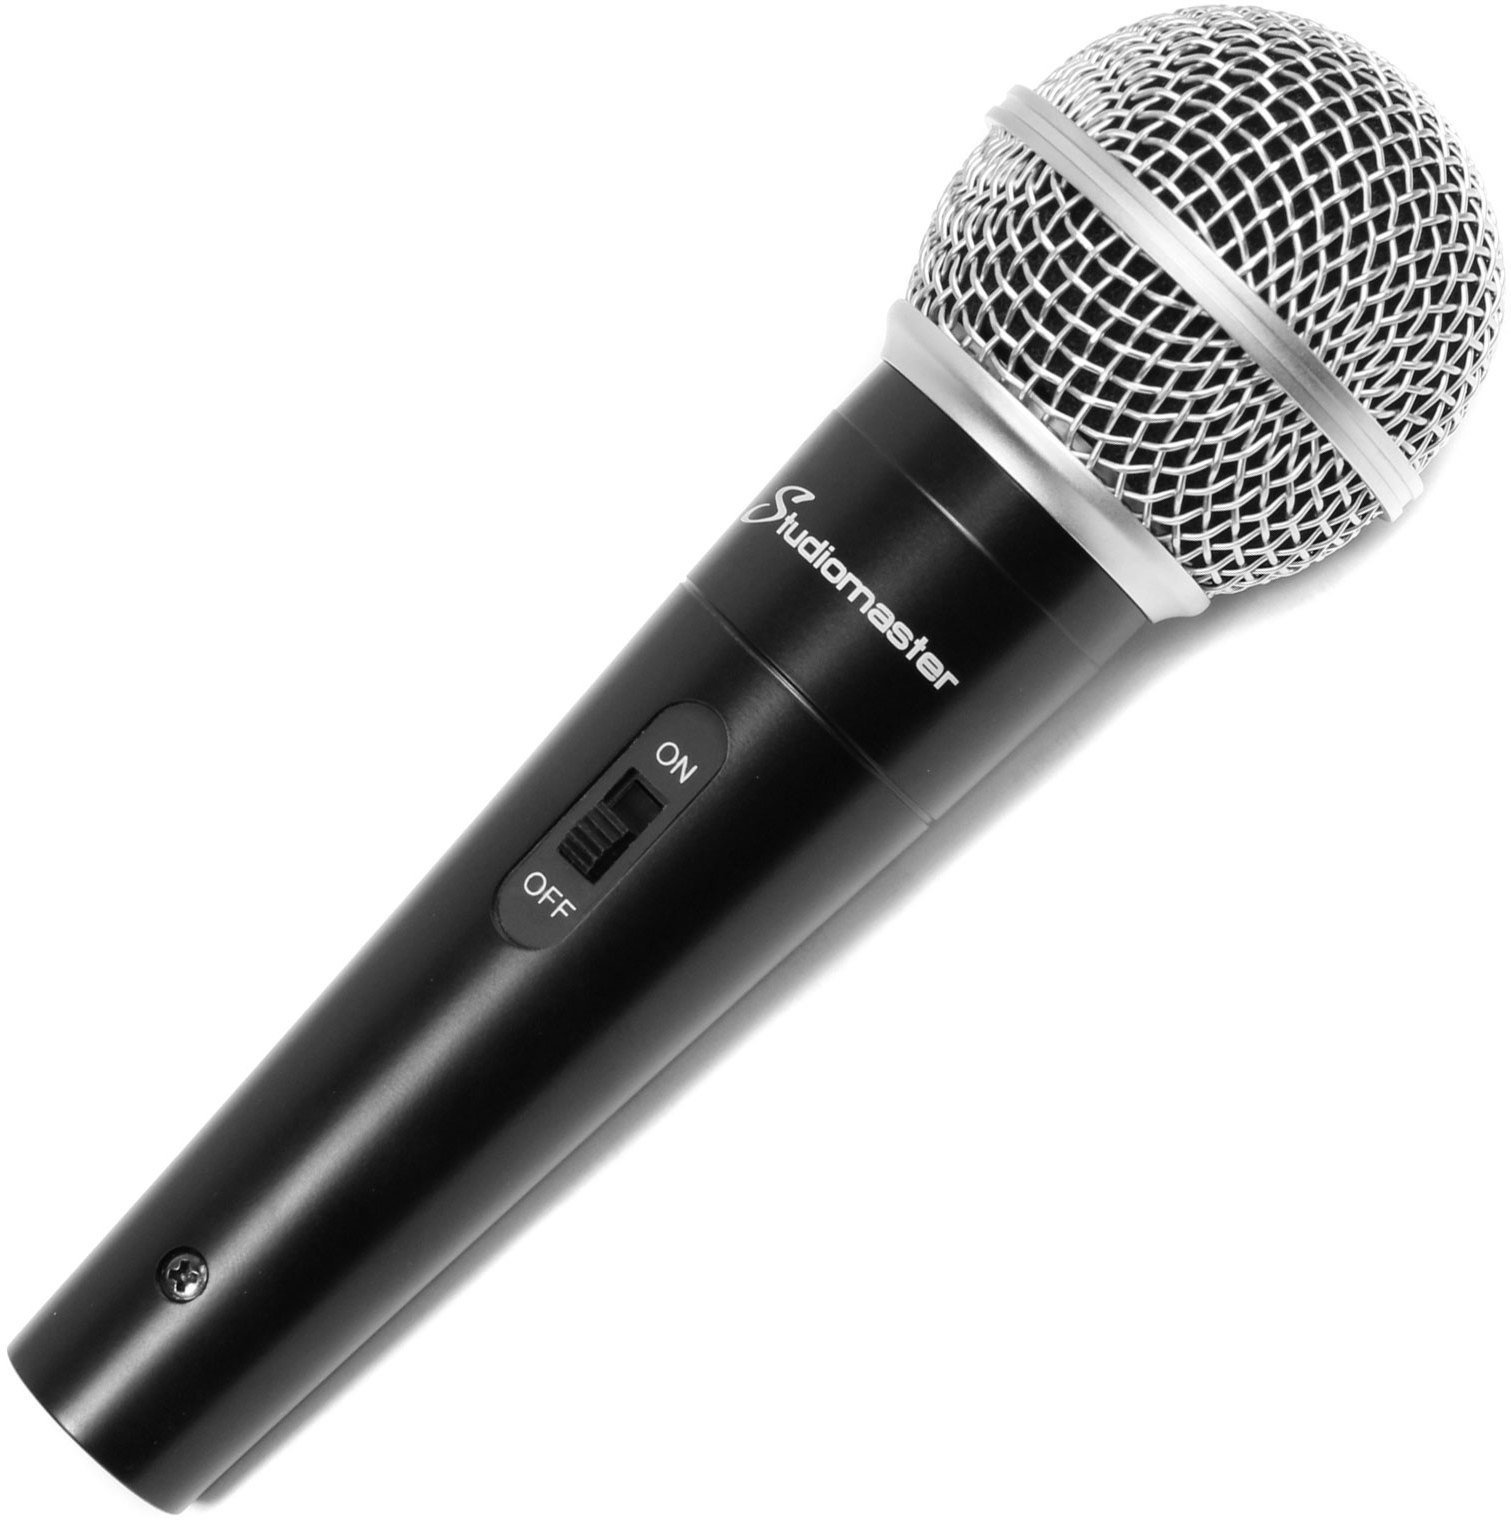 Vocal Dynamic Microphone Studiomaster KM52 Vocal Dynamic Microphone